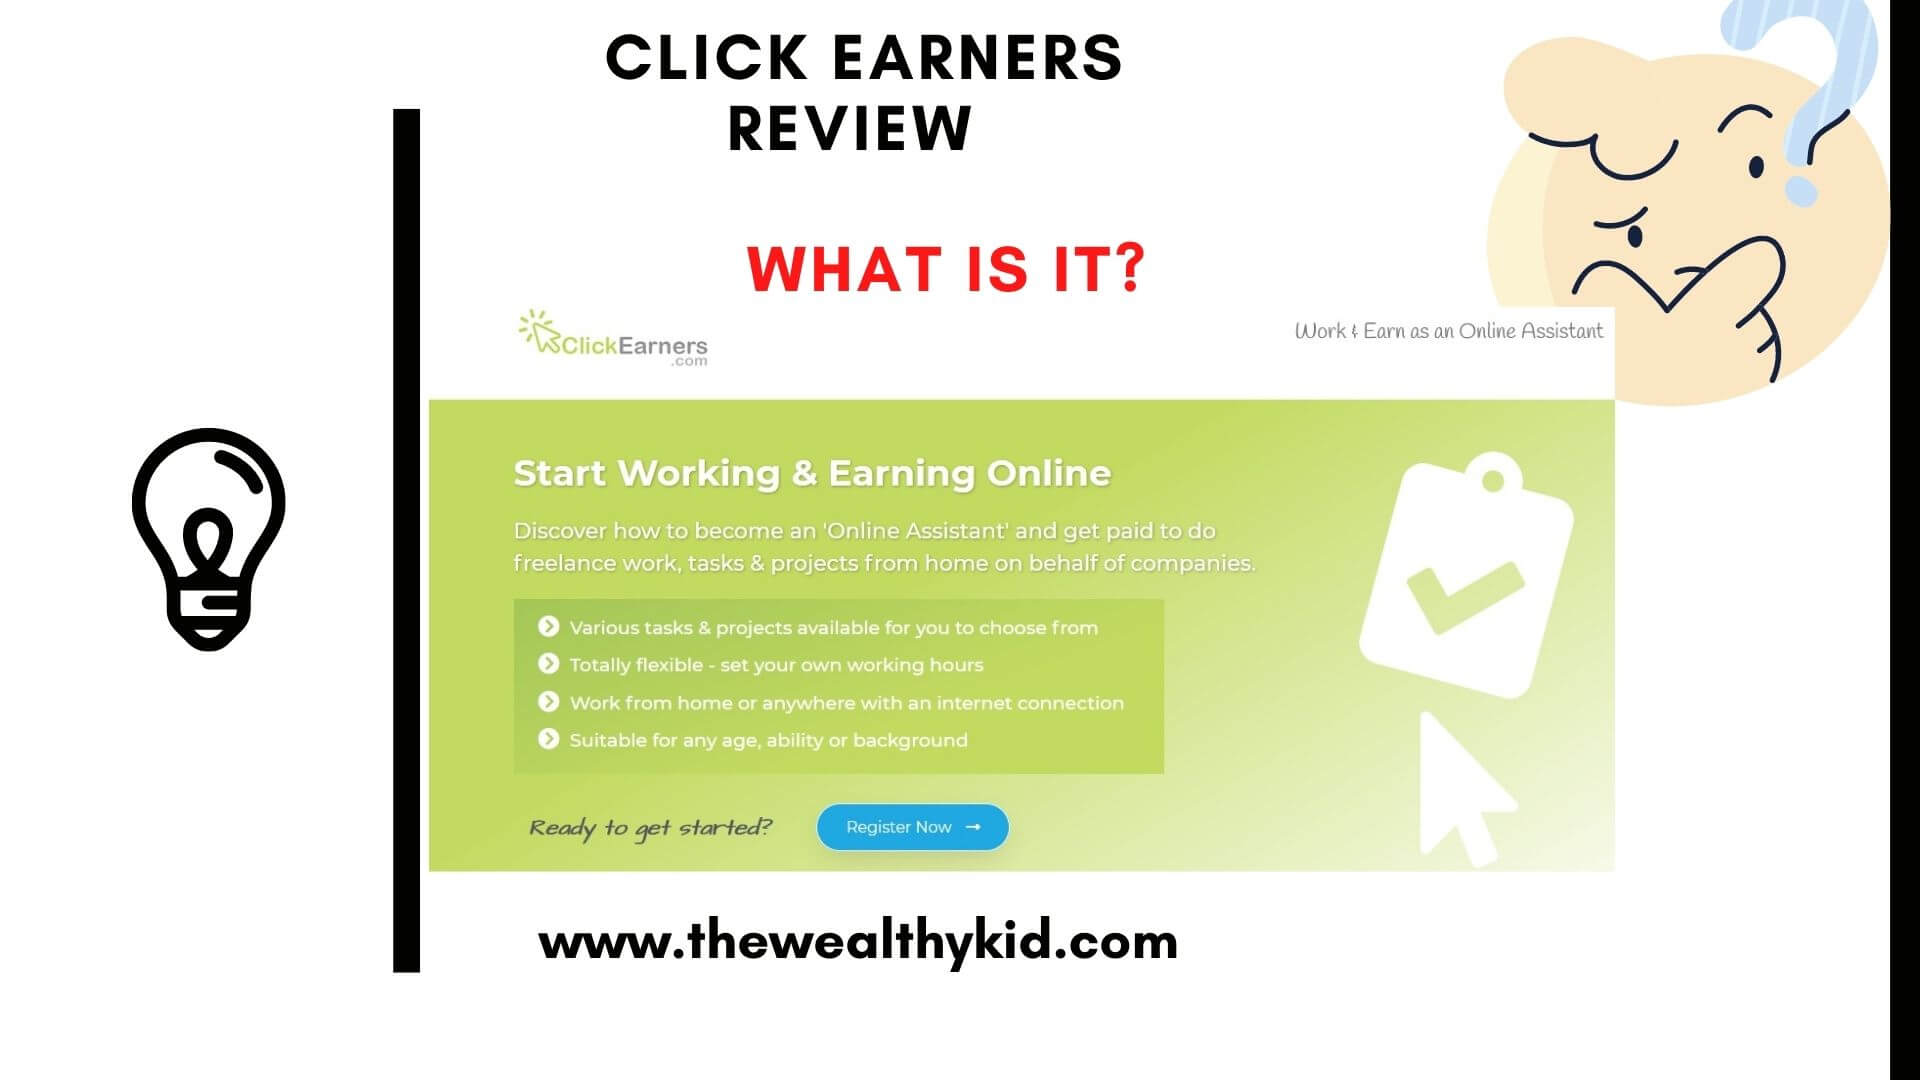 what is click earners about